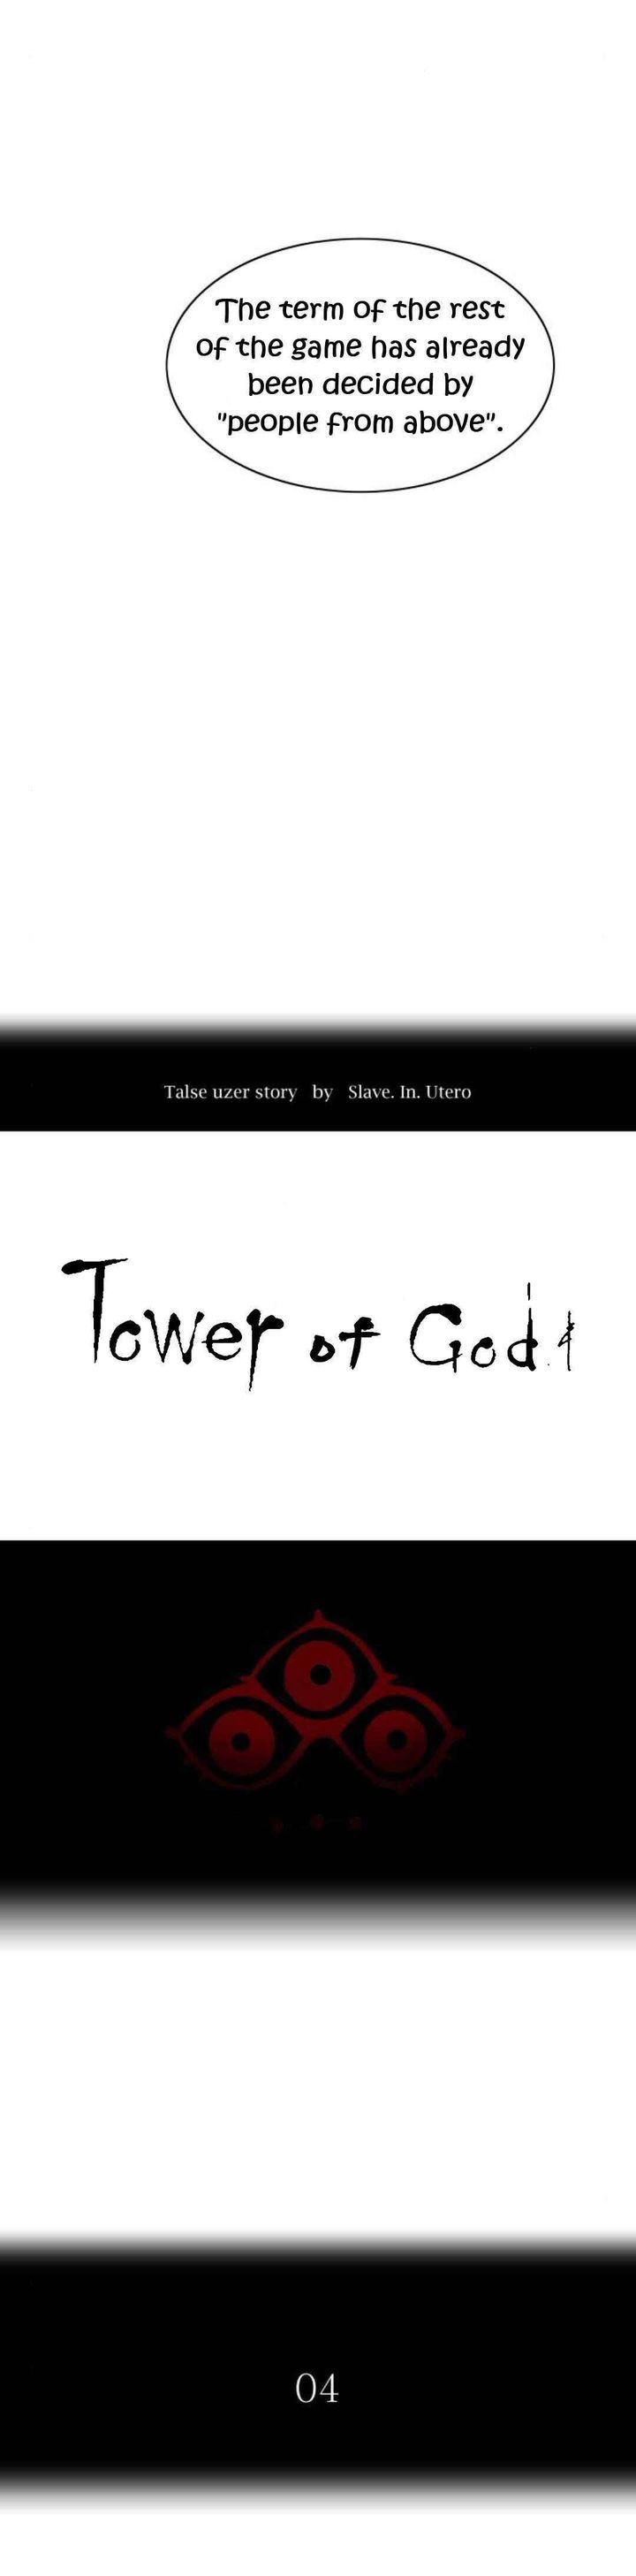 tower_of_god_489_6